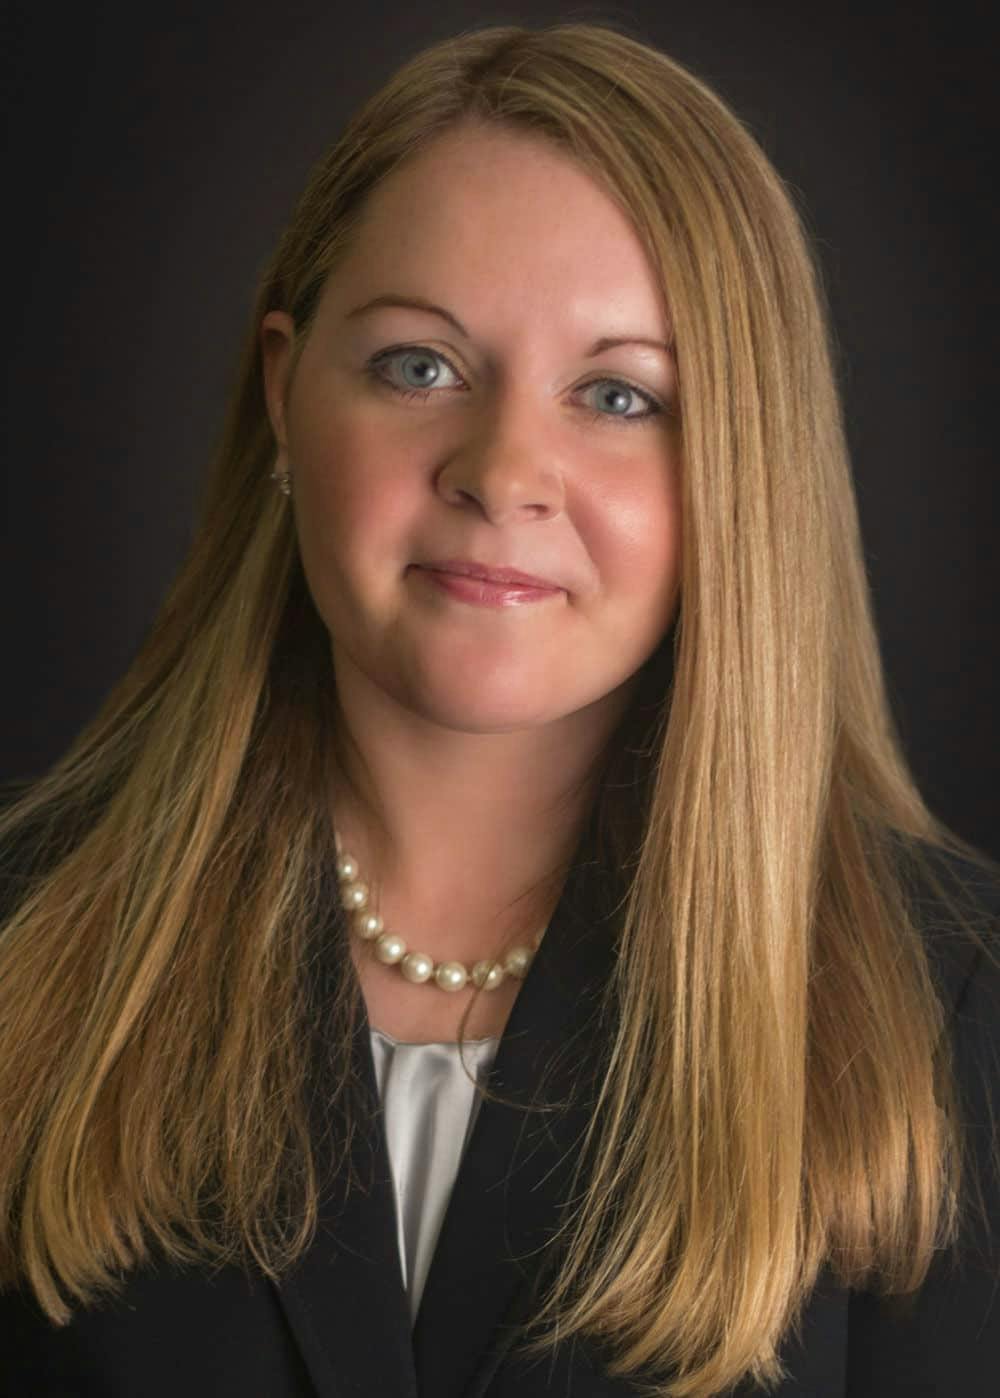 Frances E. Barto, cpmmercial litigation attorney, Scarinci Hollenbeck LLC, Lyndhurst New Jersey, New York Attorney, Ocean Township New Jersey, public law. She is also vice president of the Young Lawyers Division